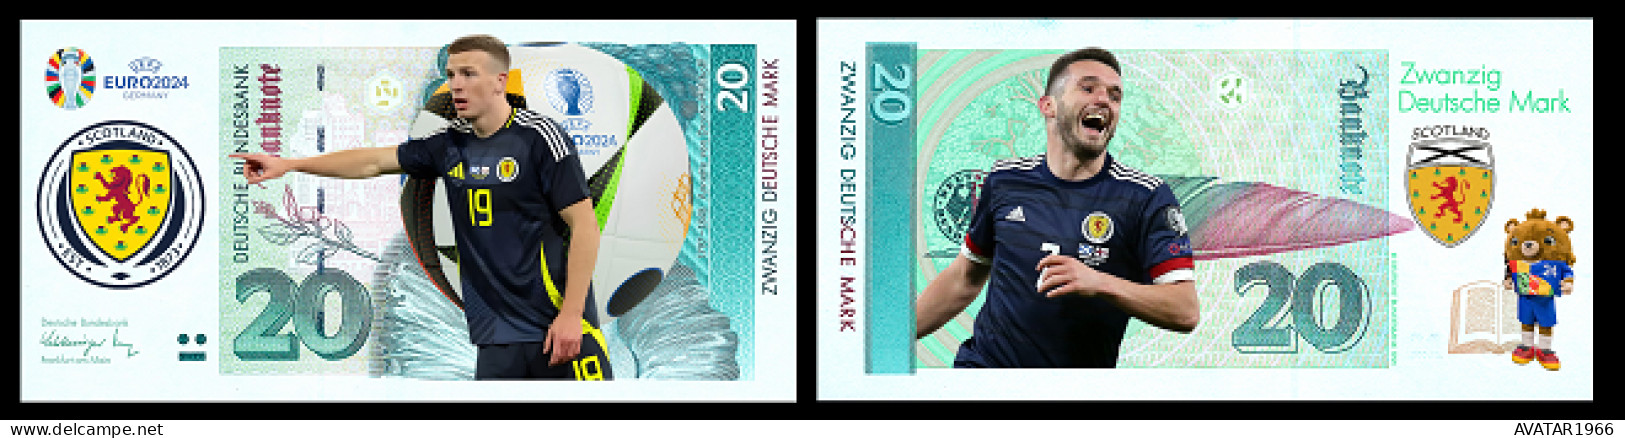 UEFA European Football Championship 2024 Qualified Country Scotland  8 Pieces Germany Fantasy Paper Money - [15] Commemoratives & Special Issues